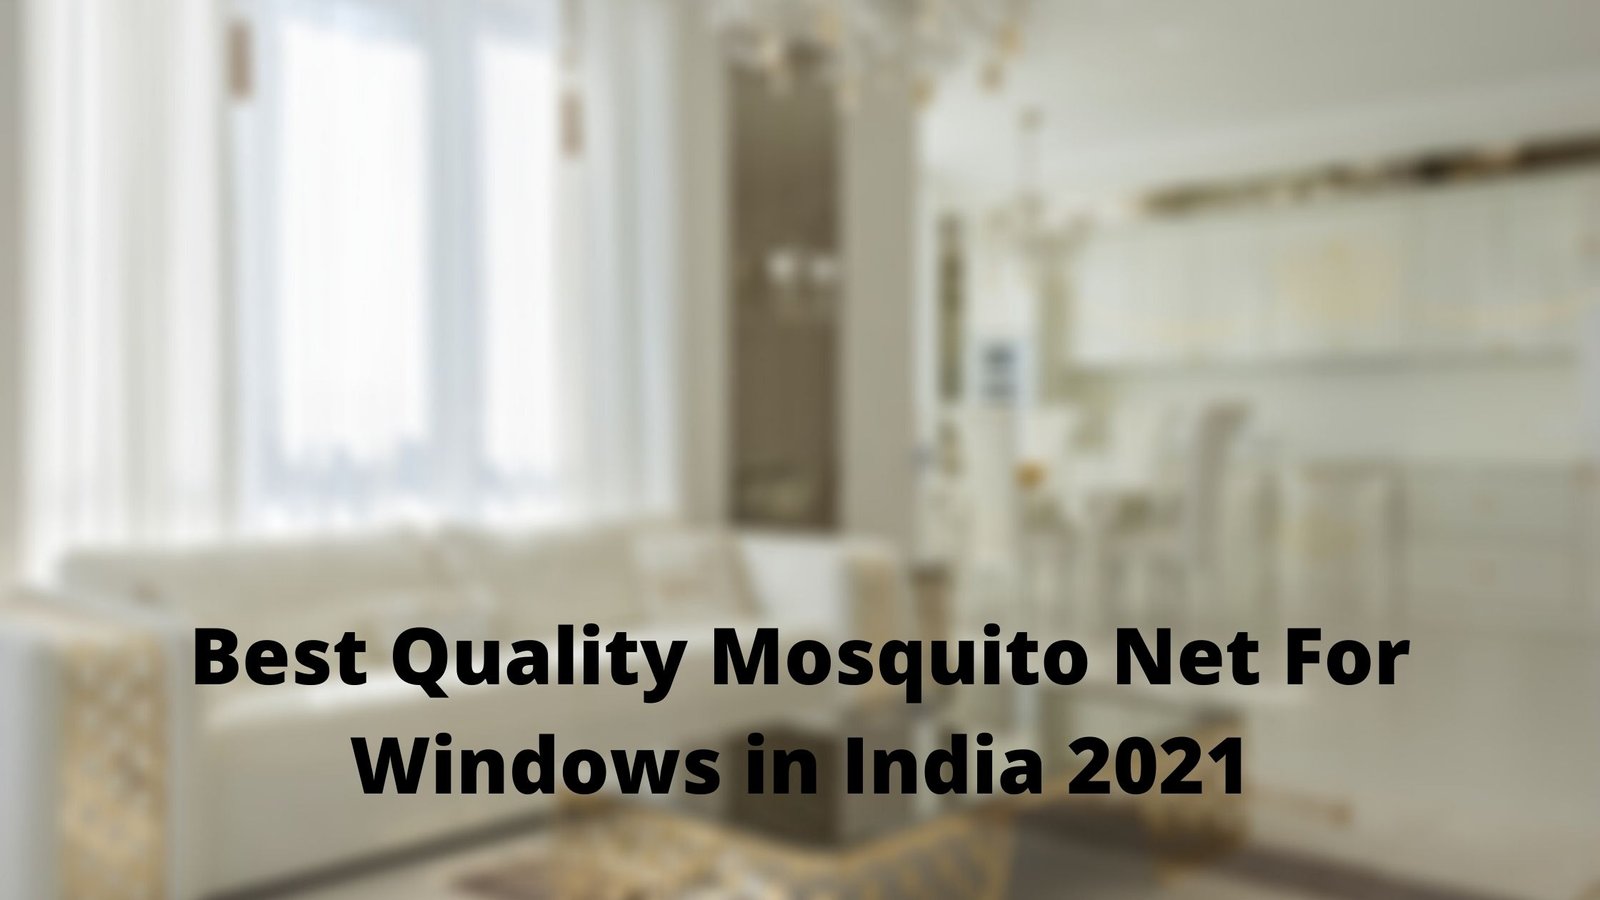 Best Quality Mosquito Net For Windows in India 2021